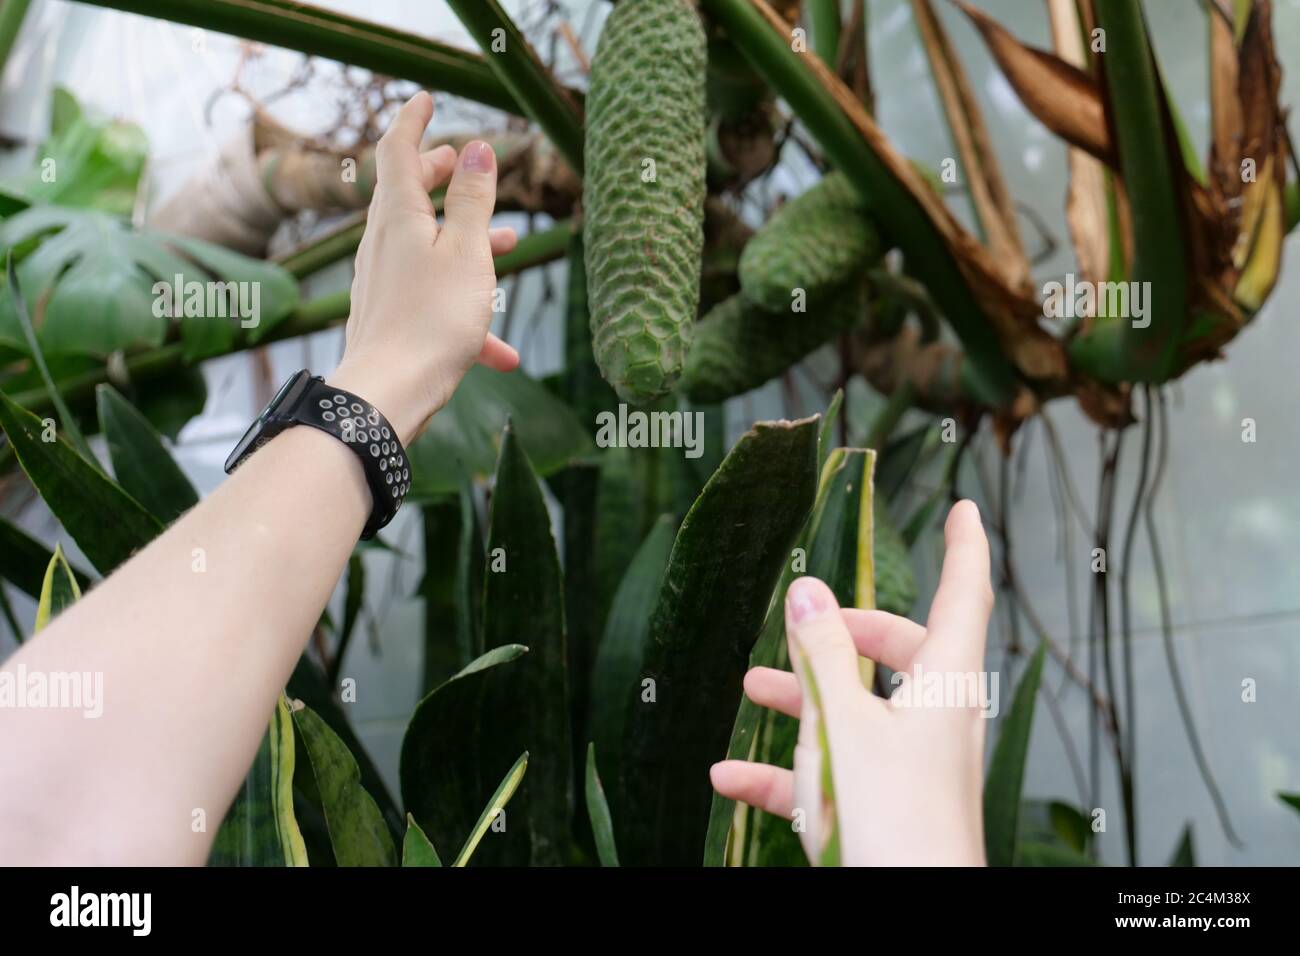 A hand holding a plantundefined Stock Photo